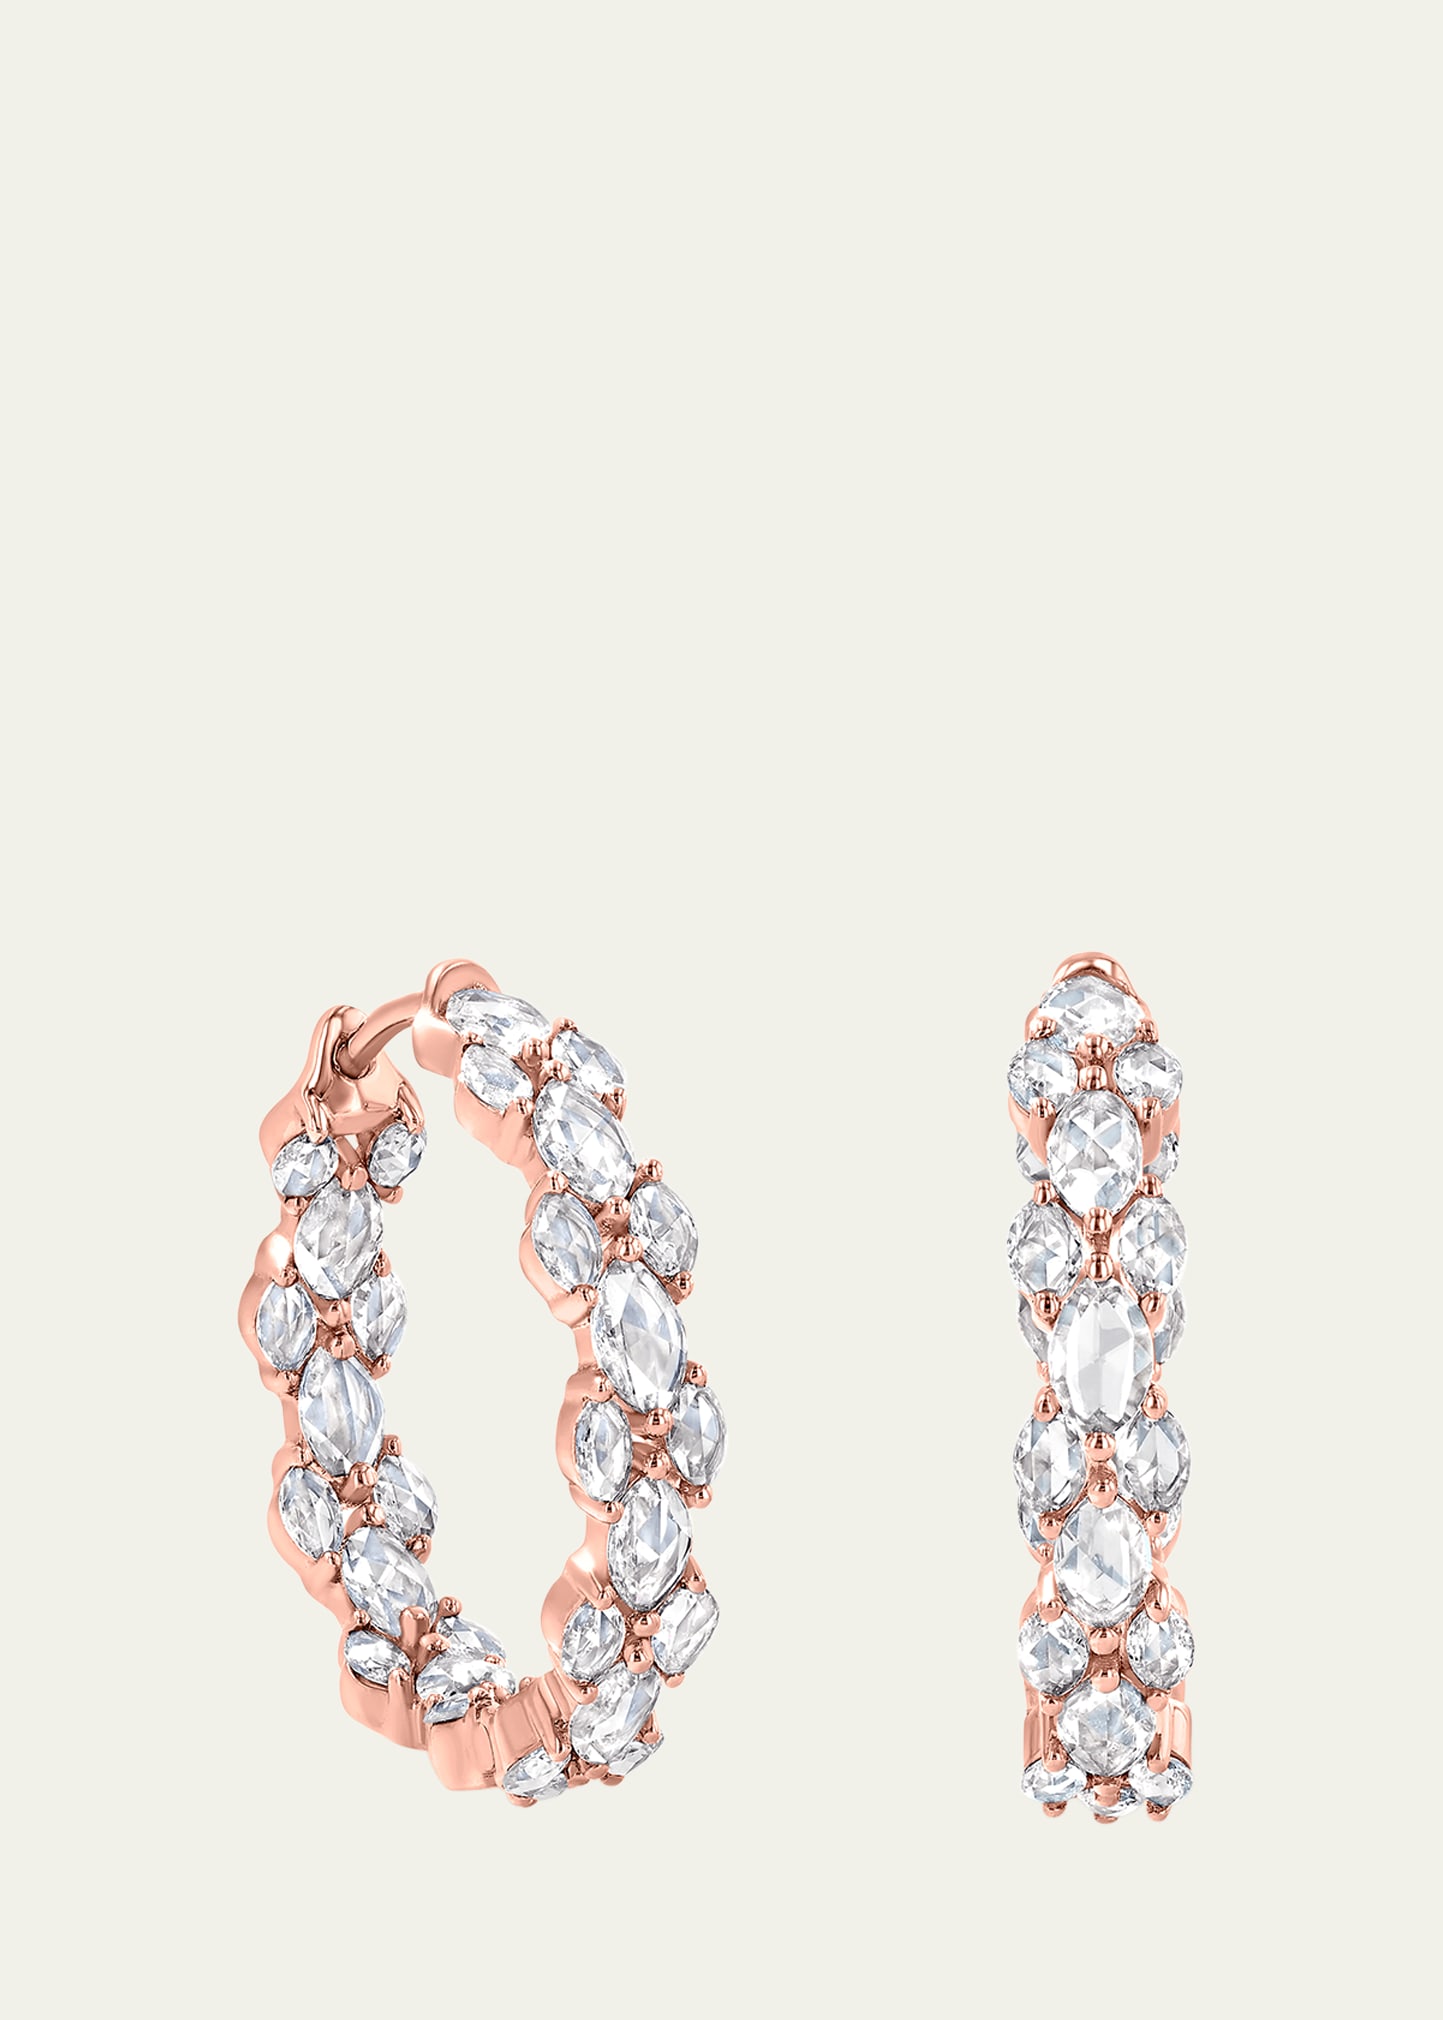 64 Facets 18k Rose Gold Mini Hoop Earrings With Diamond Columns In Neutral